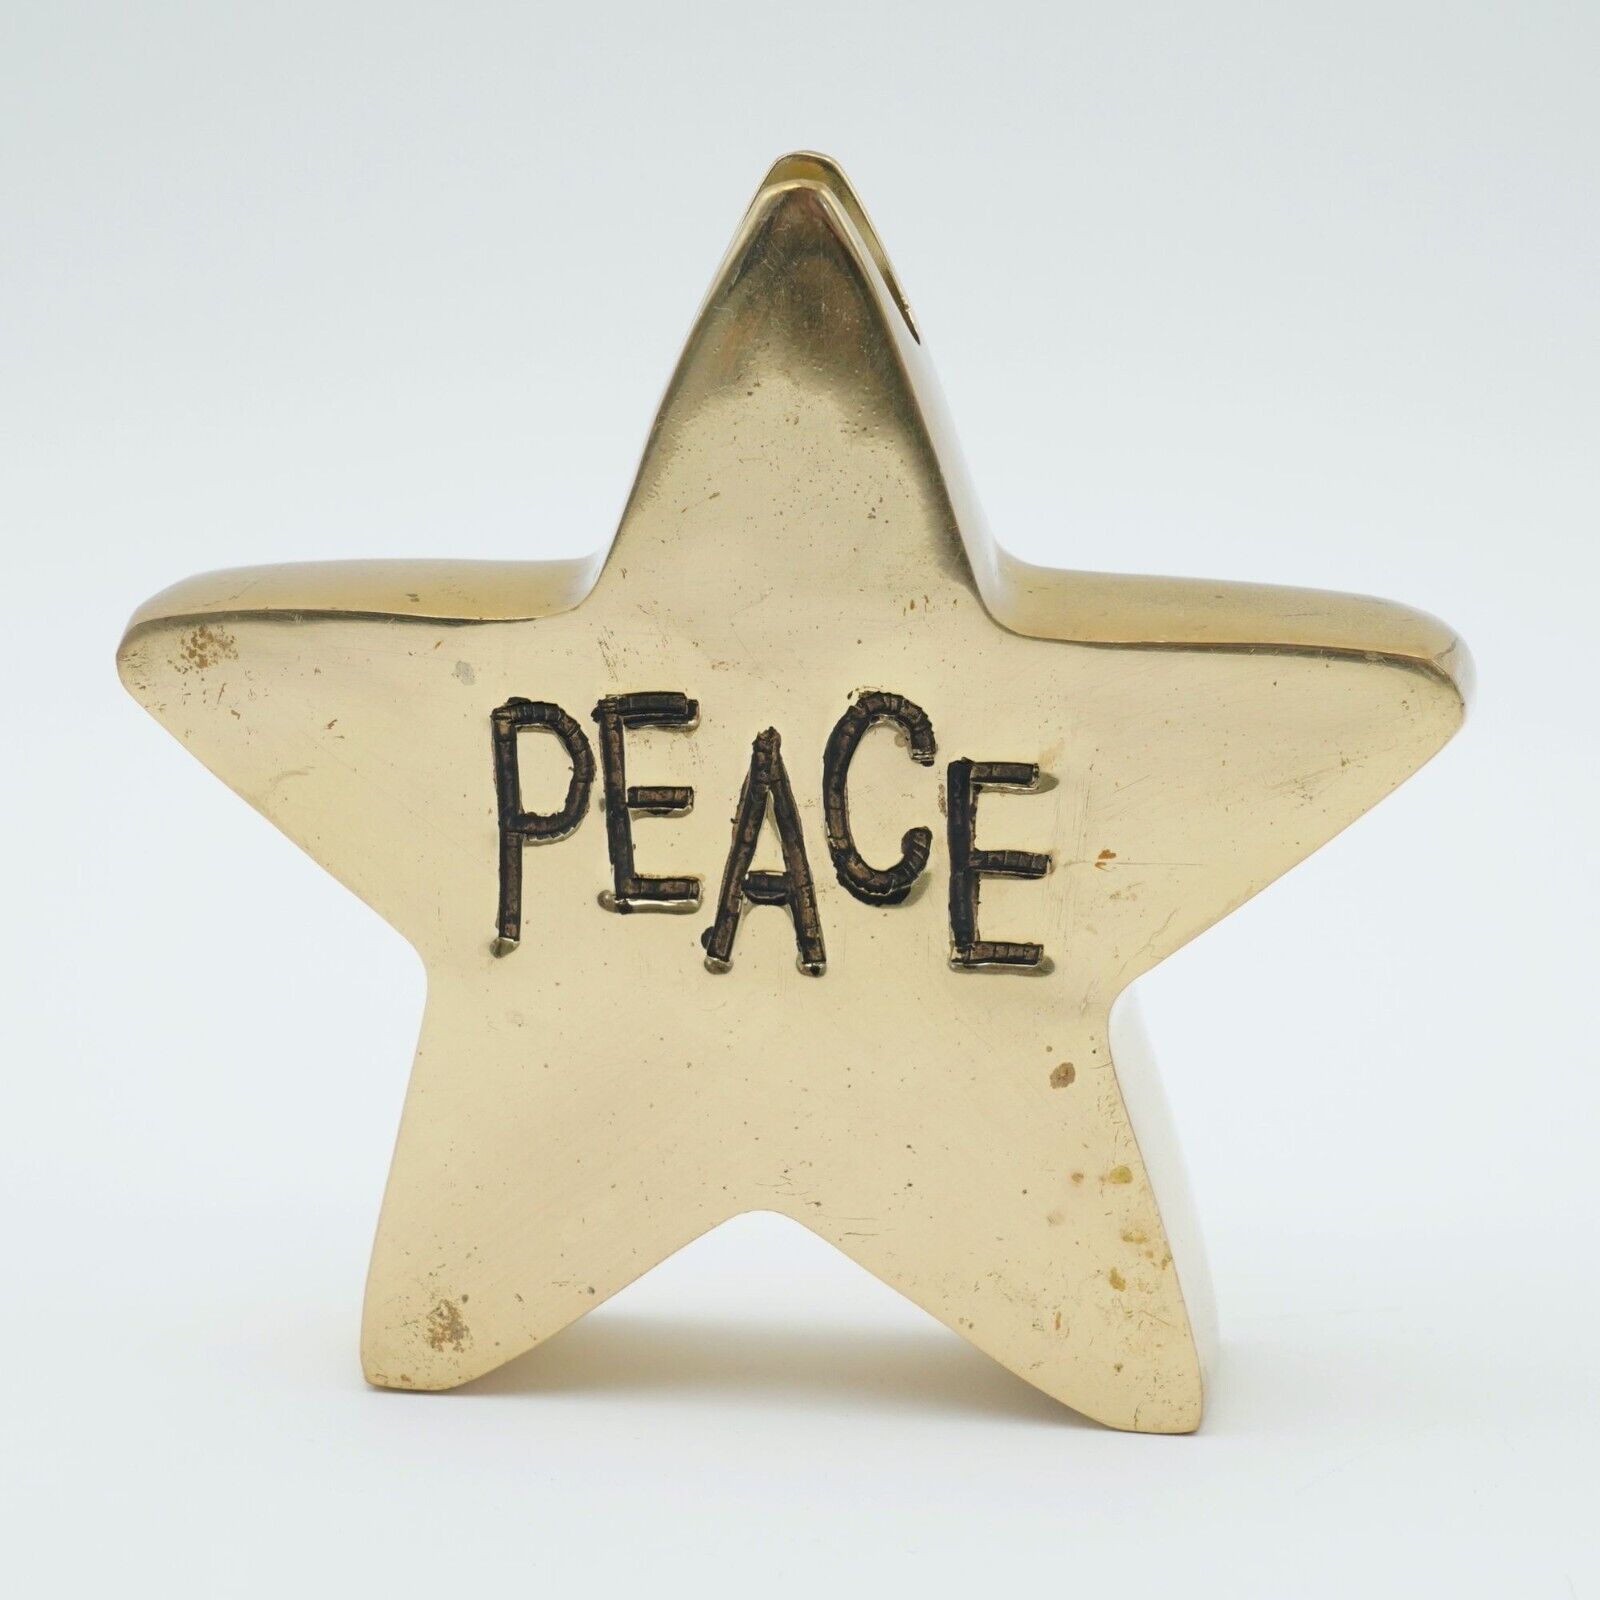 Brass Star Shaped Christmas Candle Holder - Peace